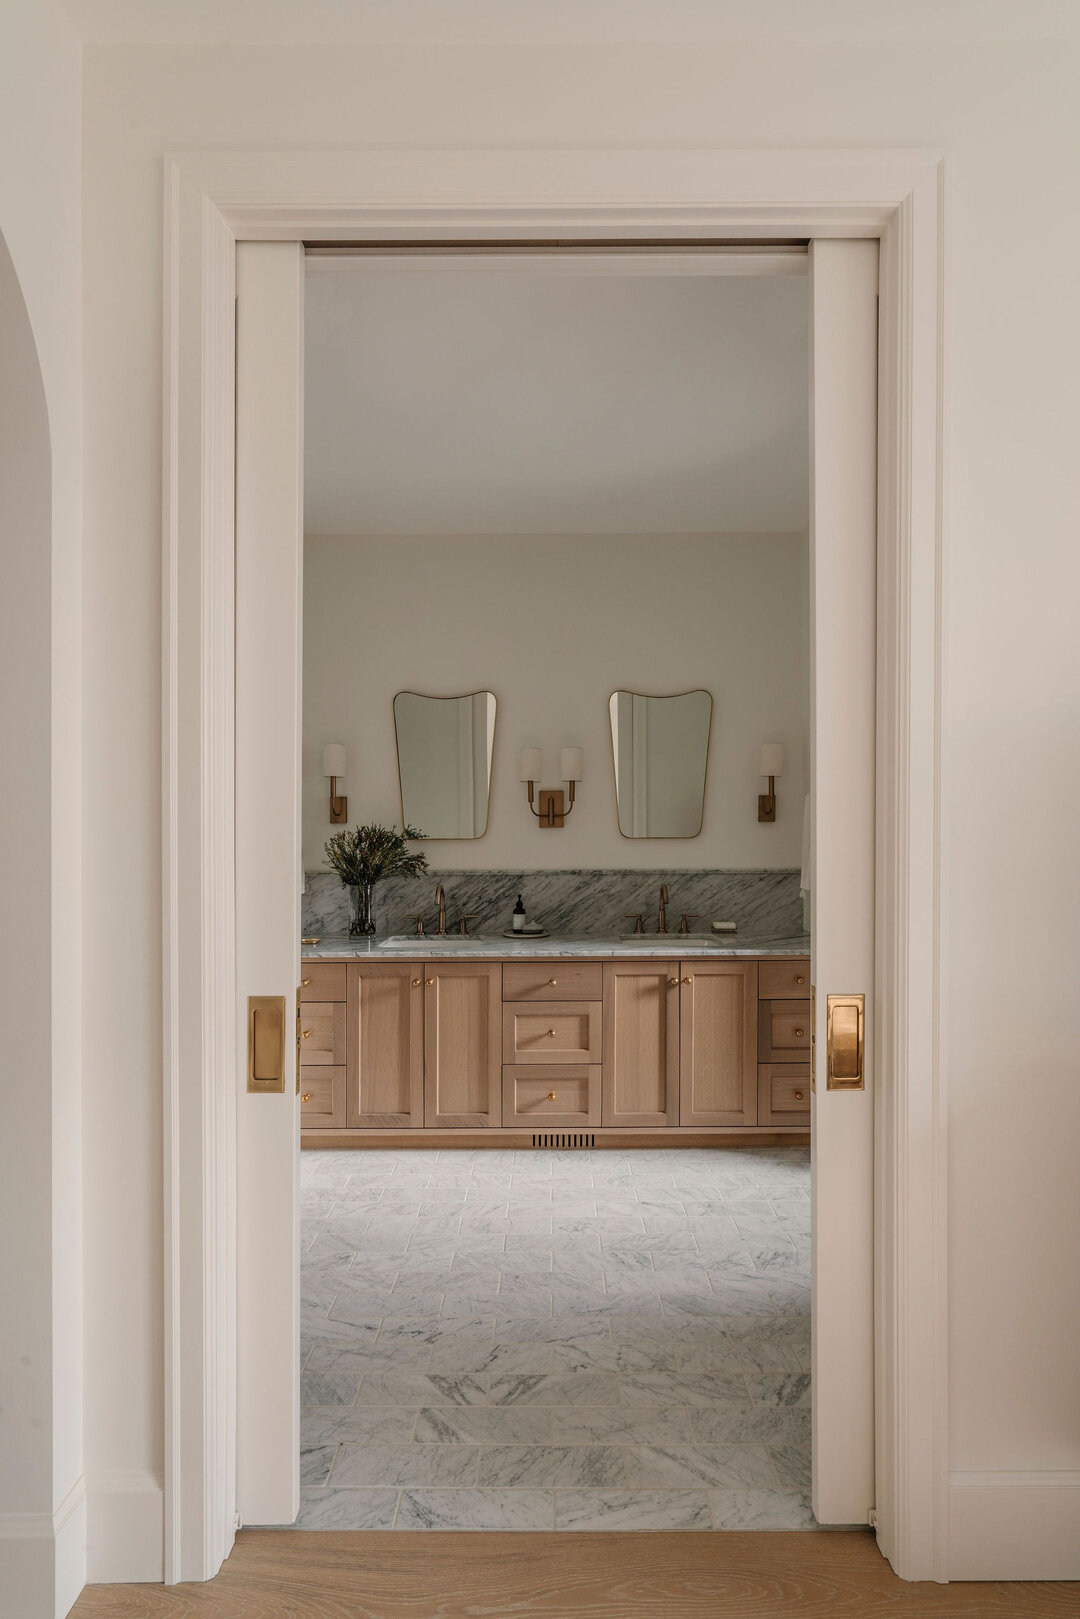 A clean and classic primary bath from #lthhouseon8th // #lthomes ​​​​​​​​​
Architectural @scaladesigns
Photography @mjay.photography

#smmakelifebeautiful #mysmphome #sodomino #smplove #mycovetedhome #apartmenttherapy #theeverygirlathome #bhilivebeau